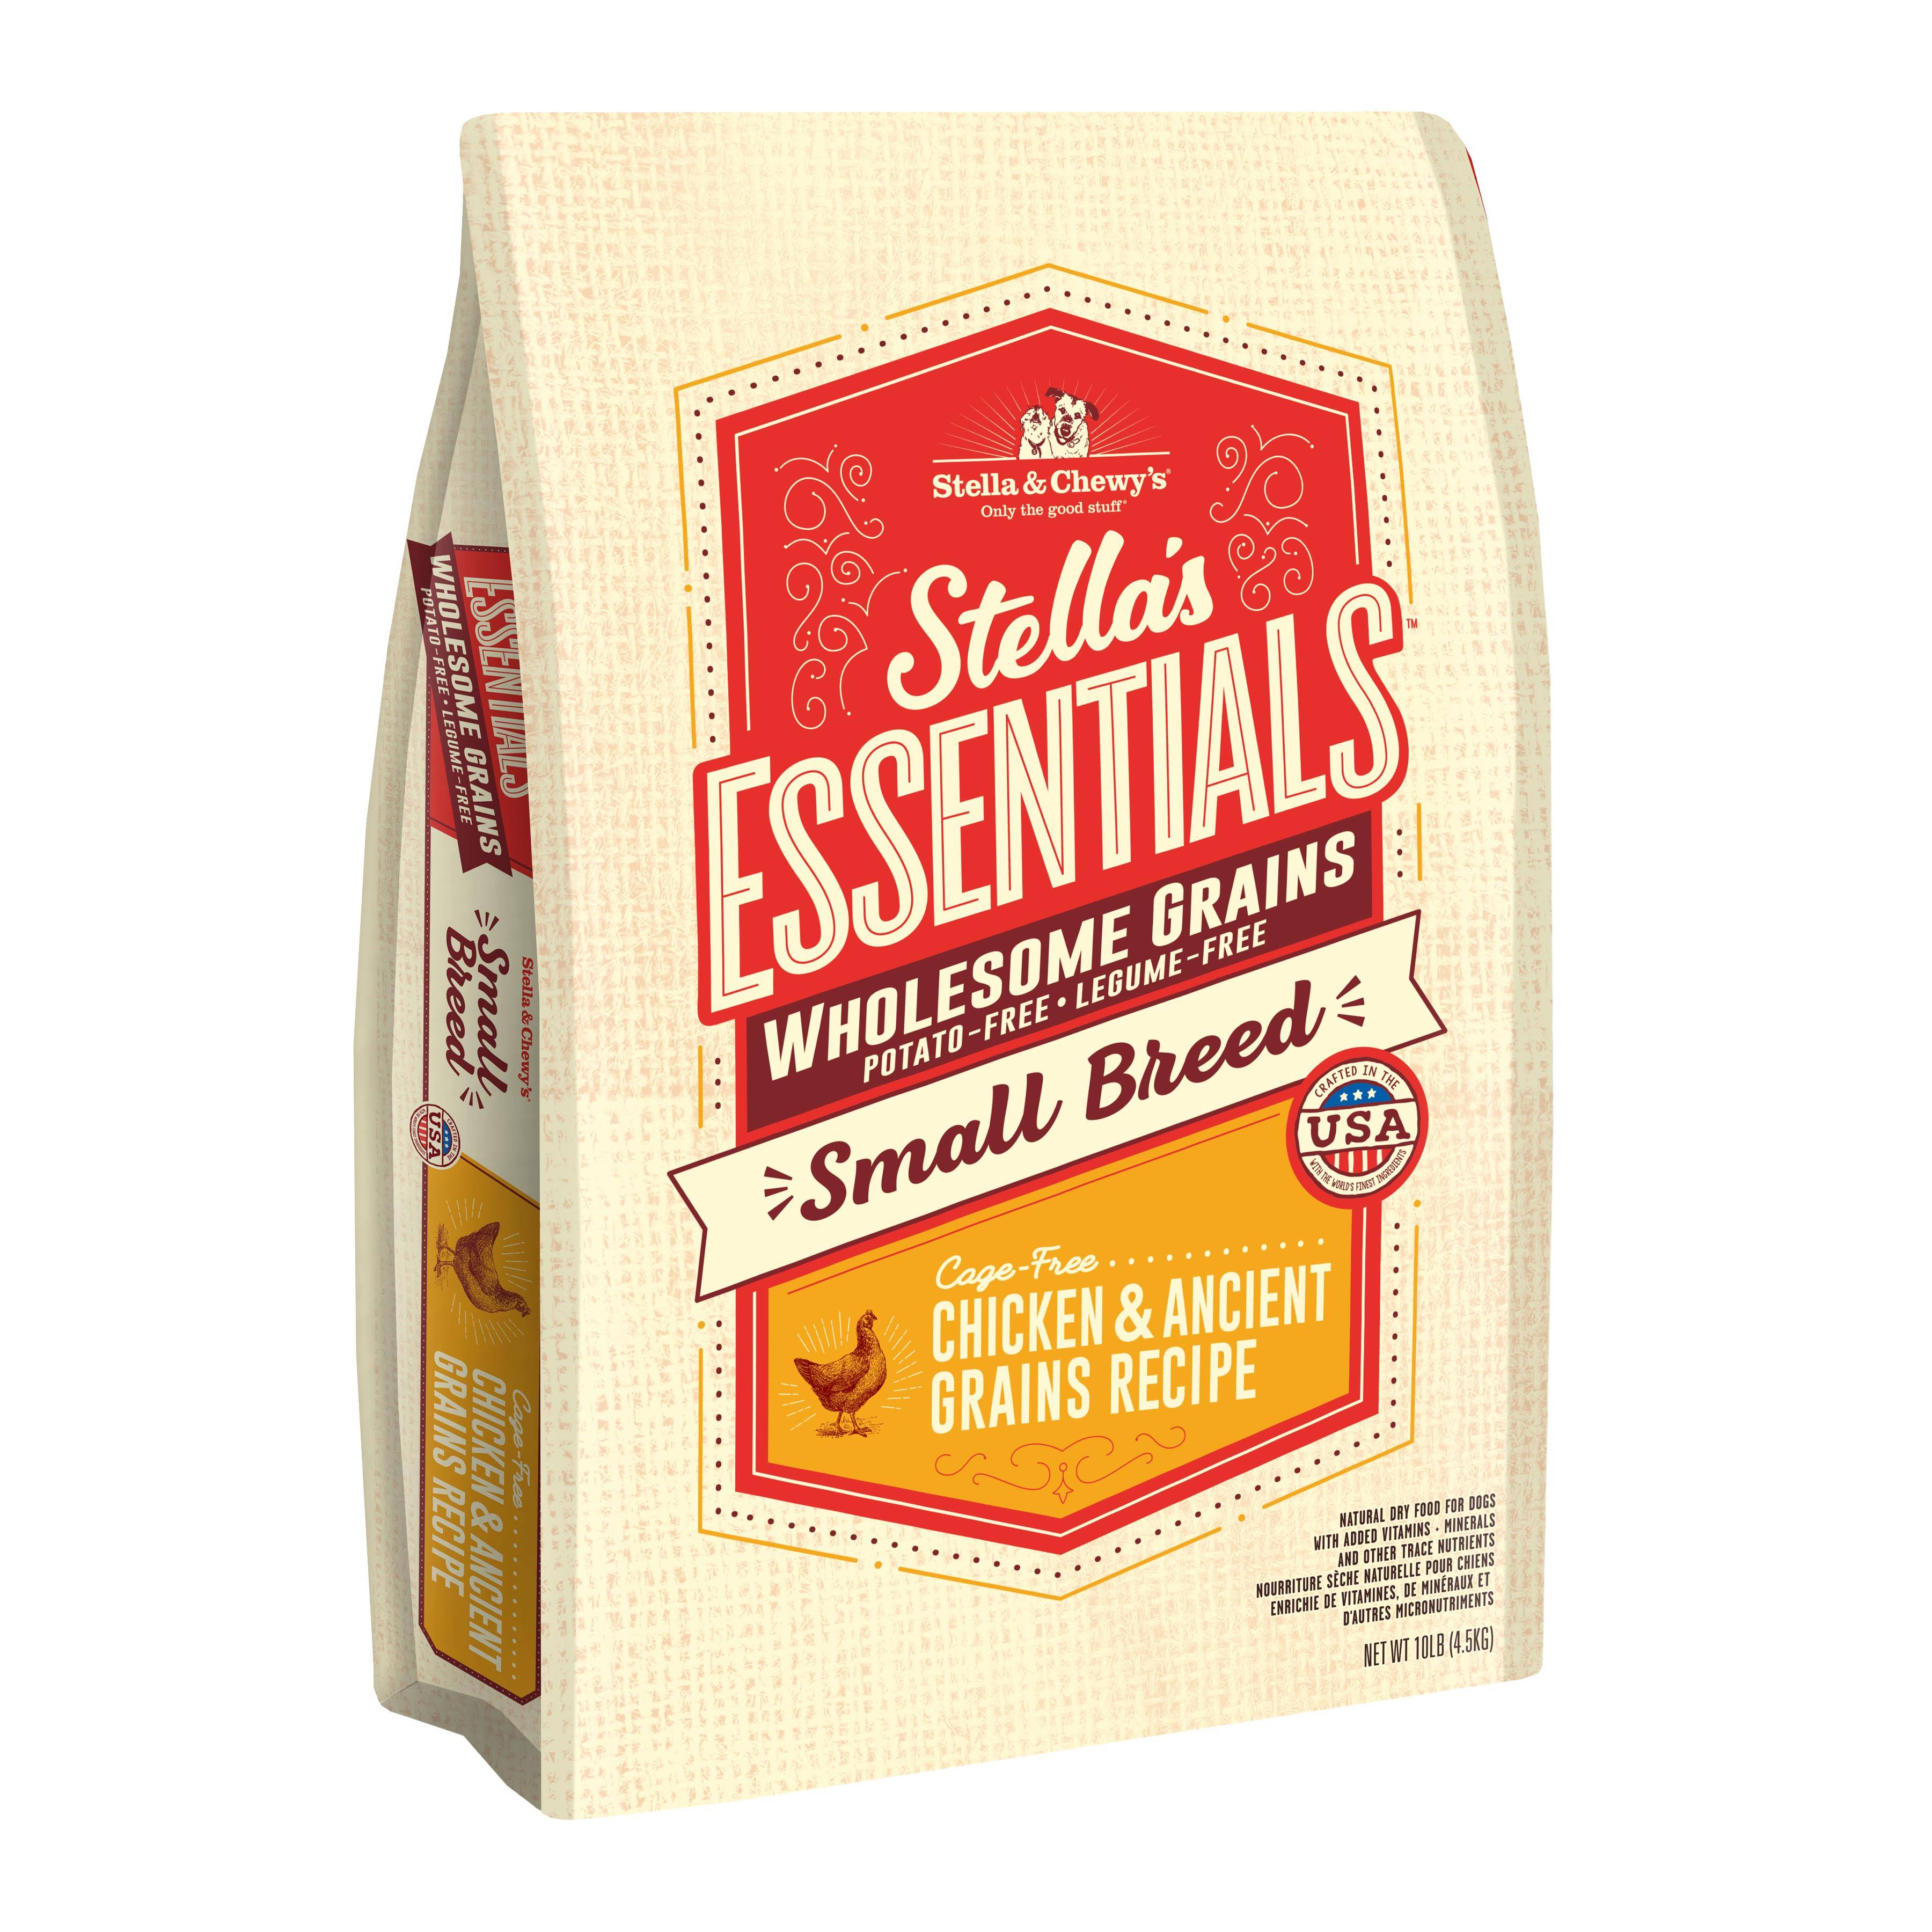 Stella & Chewy's Essentials Cage-Free Chicken & Ancient Grains Recipe for Small Breed Dog Food - 10-Lbs.